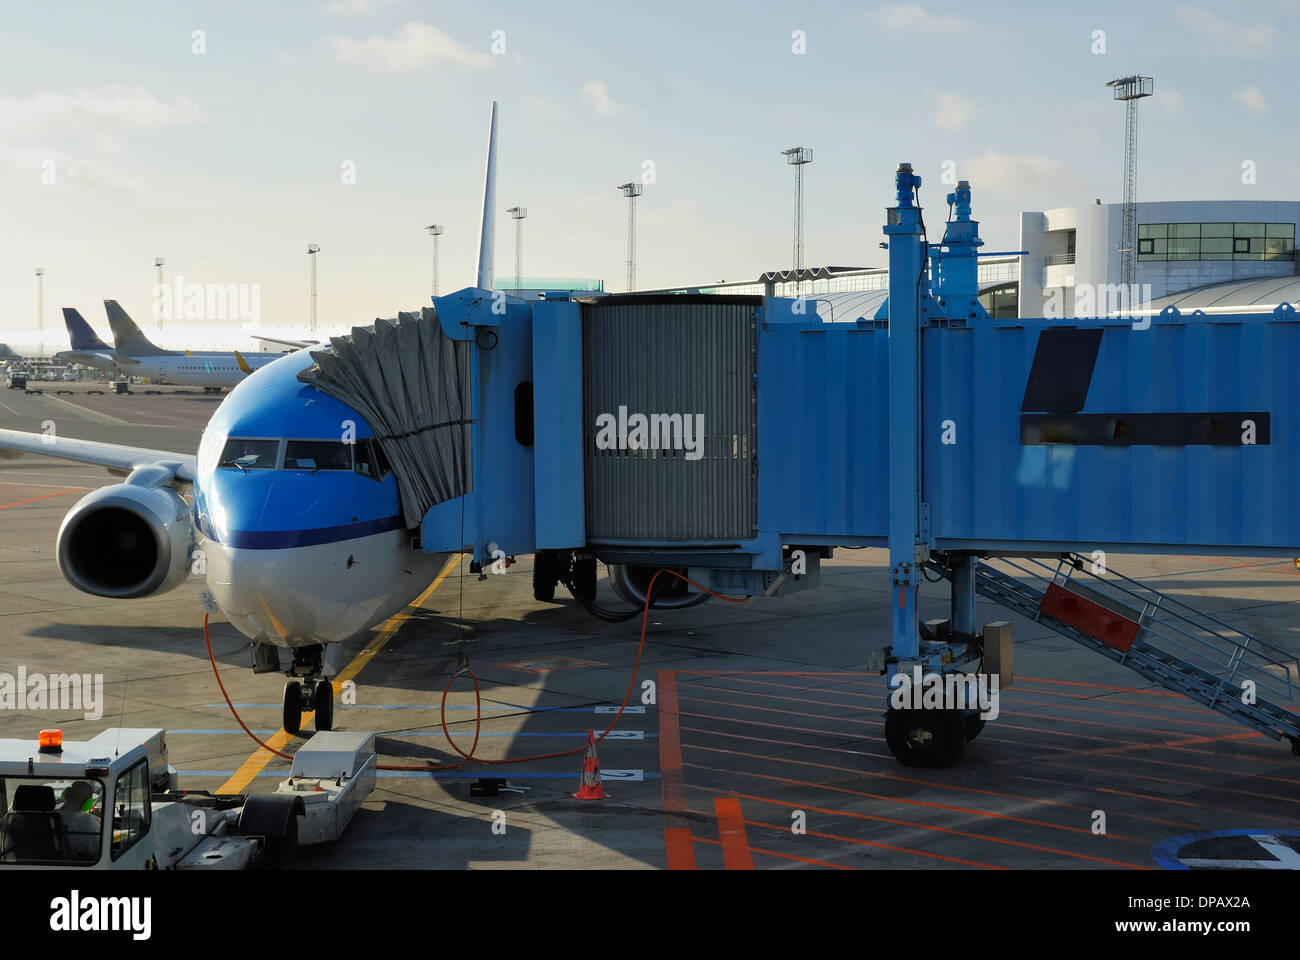 Airplanes loading on airport Stock Photo